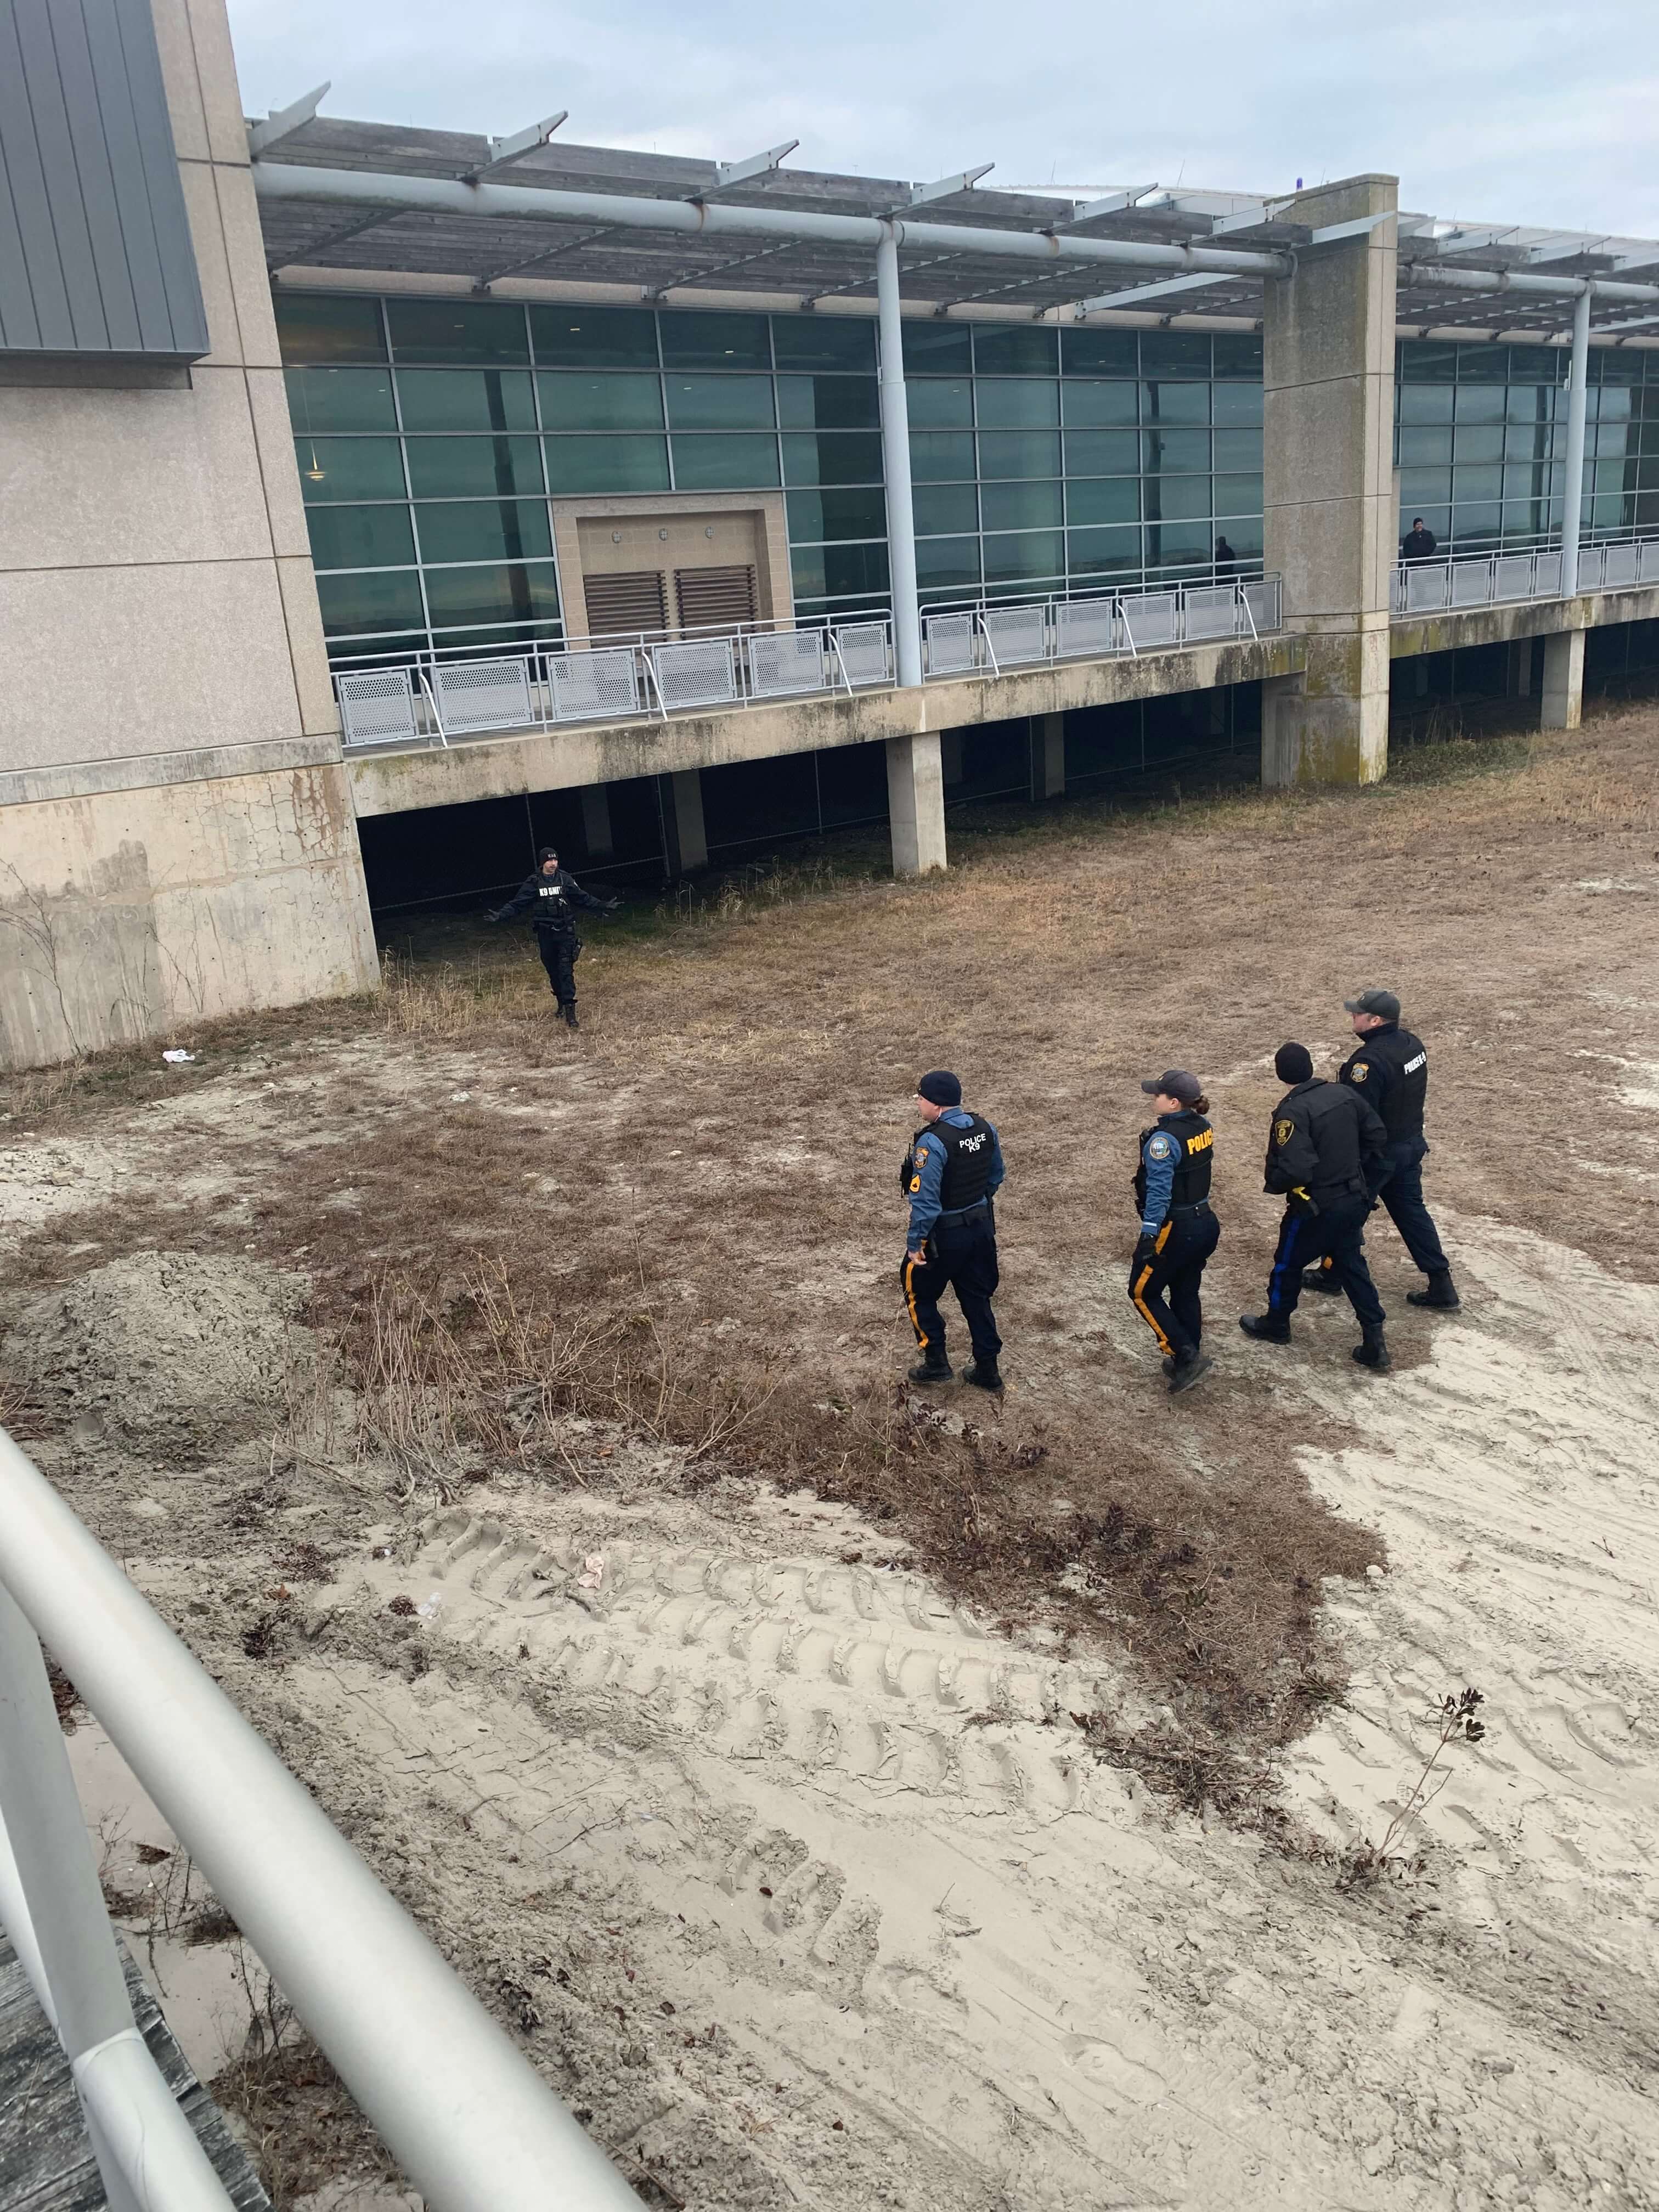 Law enforcement officers from multiple municipalities patrol the grounds of the Wildwoods Convention Center Jan. 28.